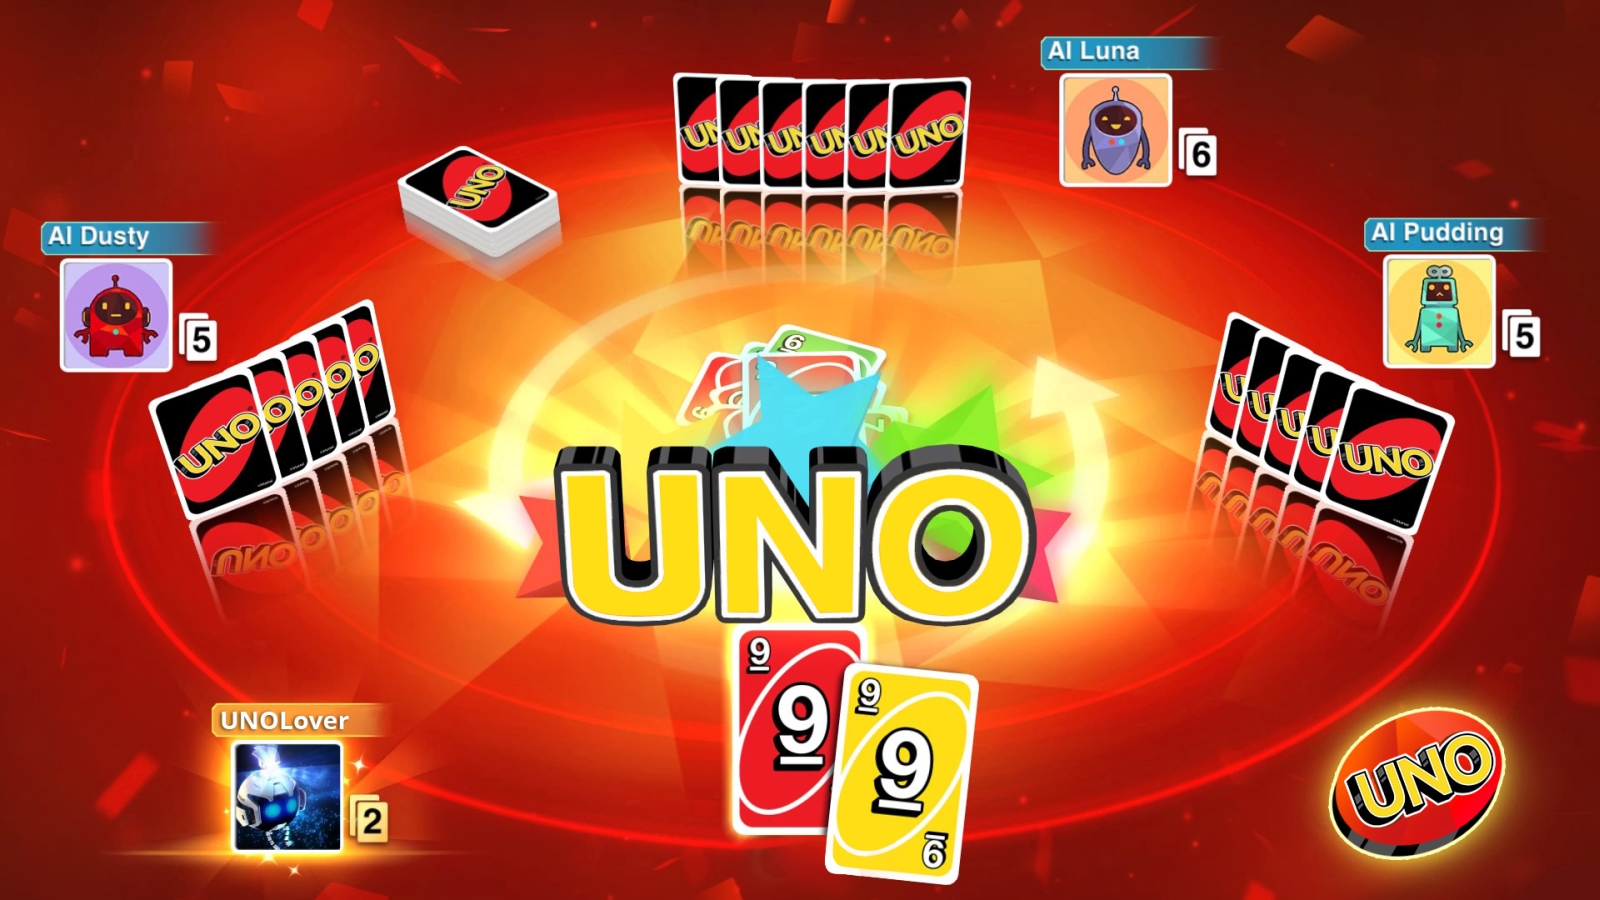 Someone could've jumped in on that - Crazy uno run